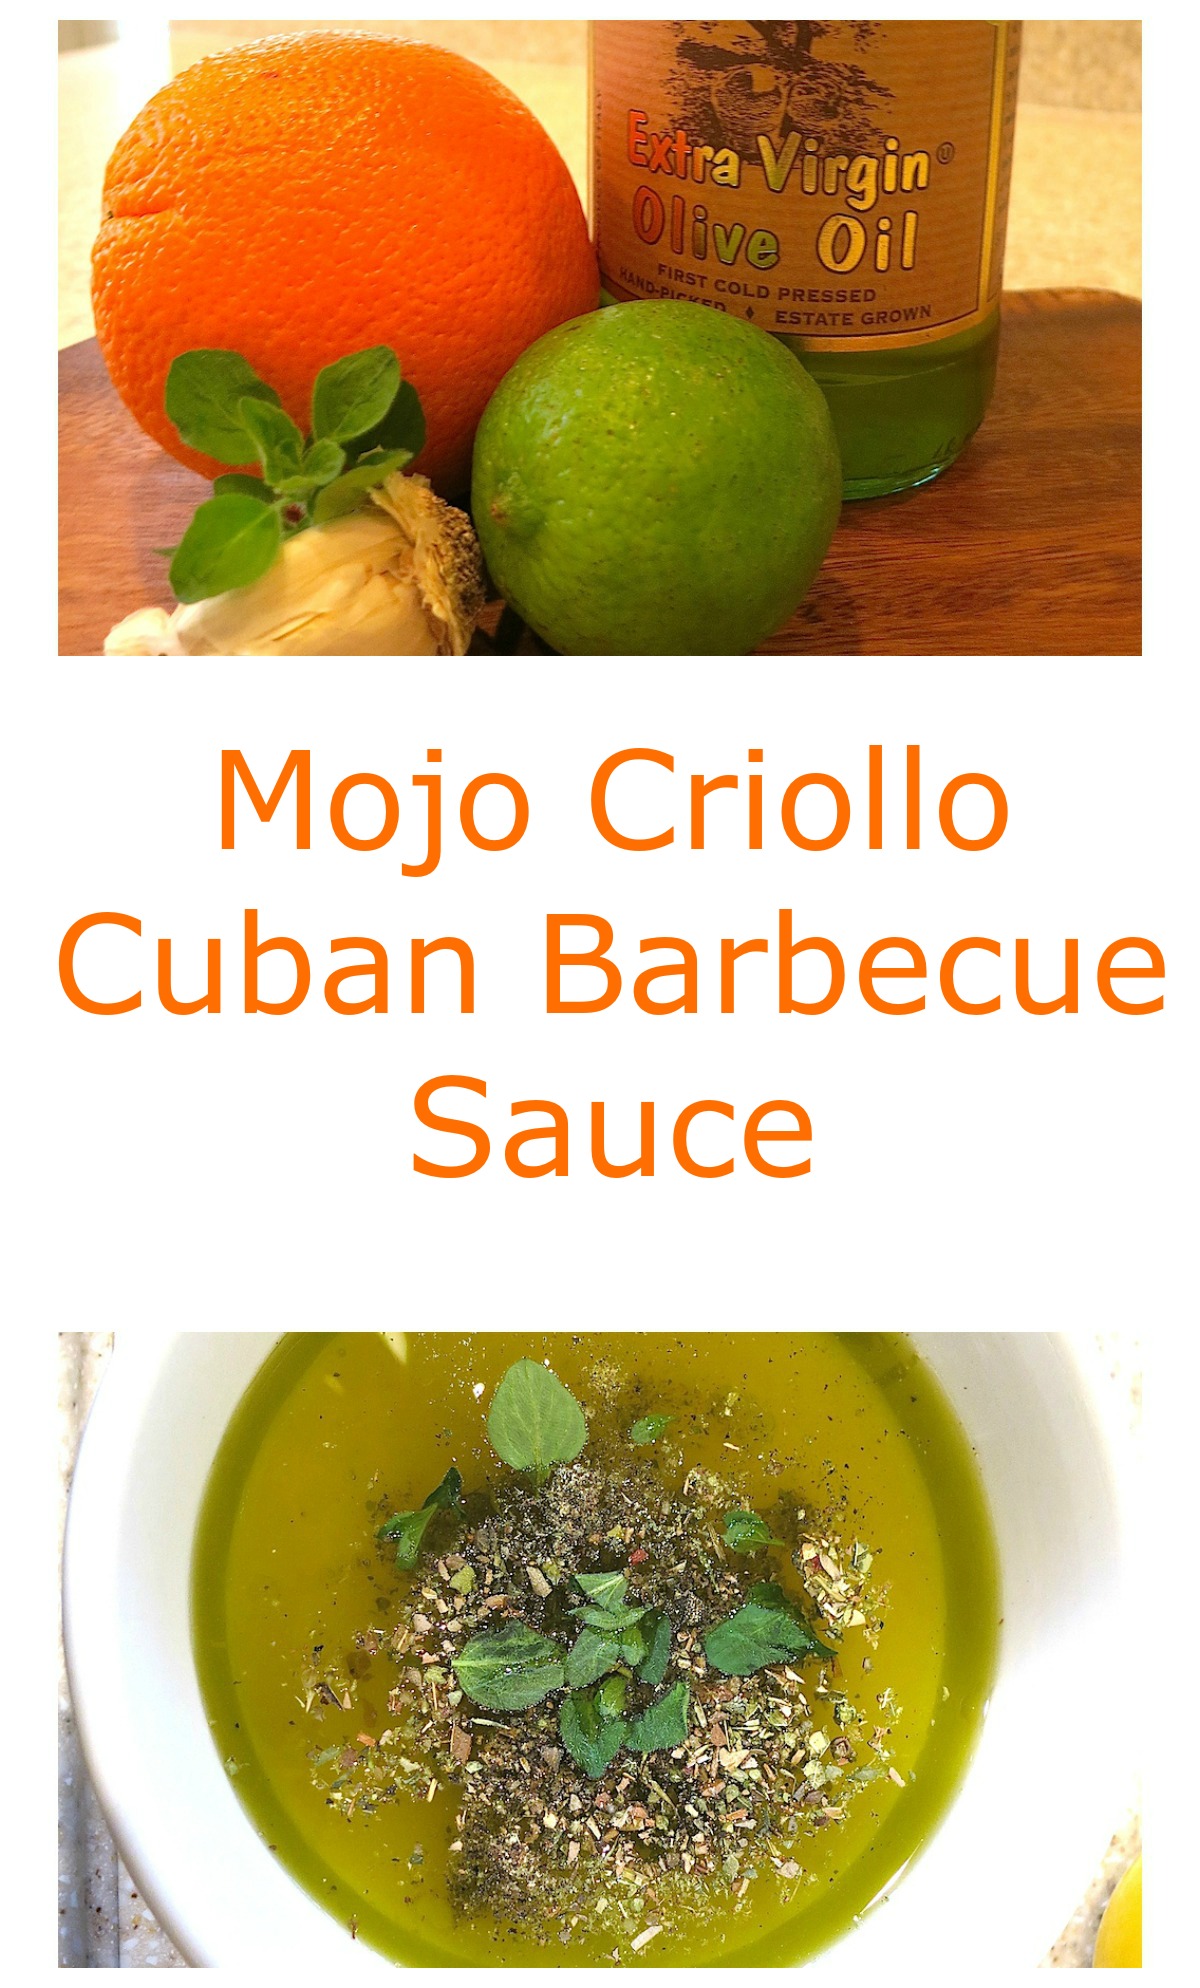 Perfect marinade for grilling meat and poultry - Mojo Criollo - Cuban Barbecue Sauce